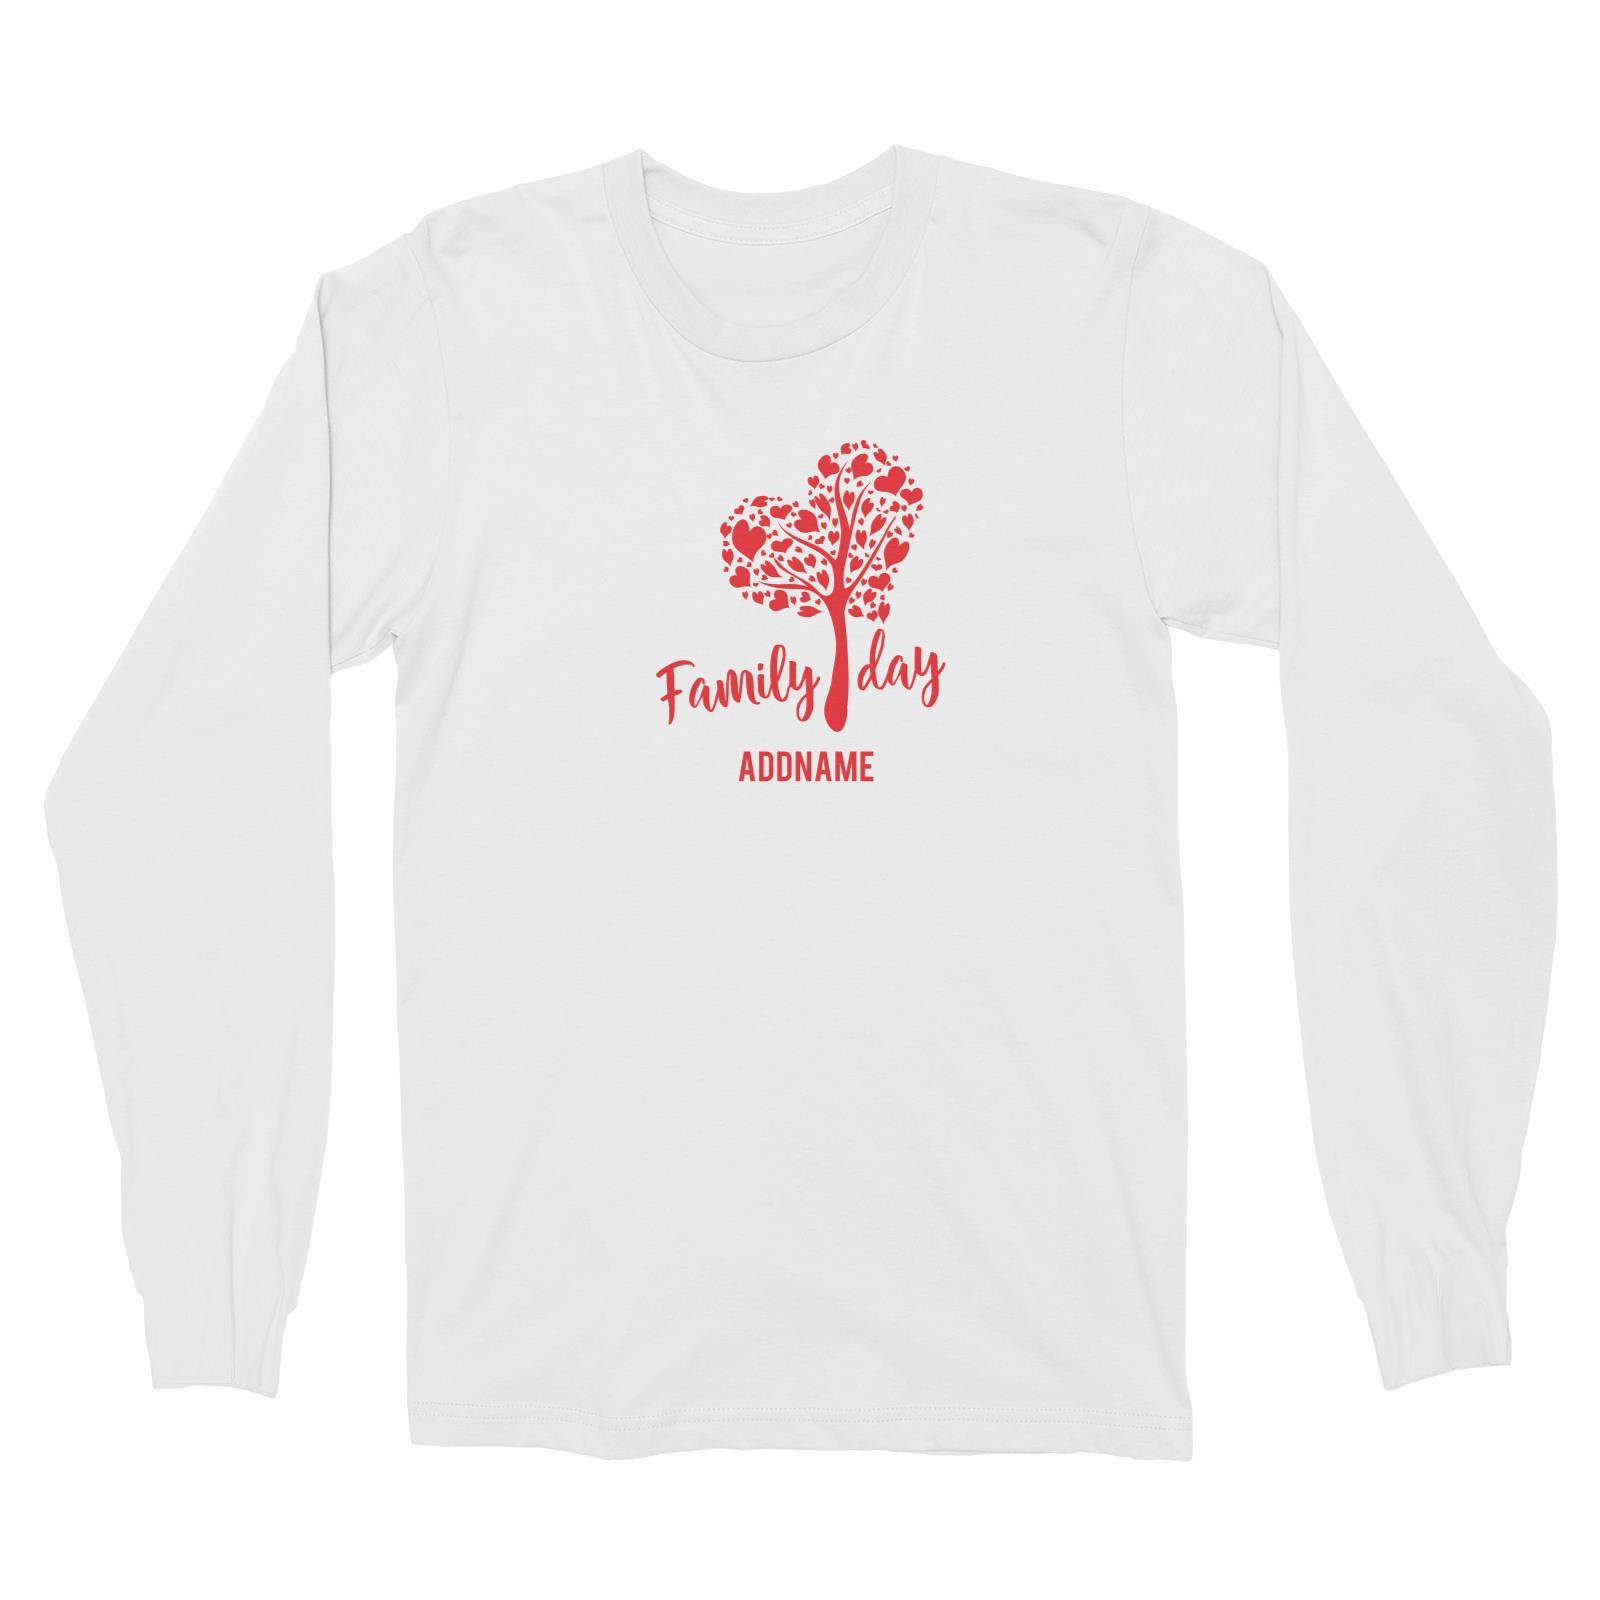 Family Day Love Tree With Love Leaves Family Day Addname Long Sleeve Unisex T-Shirt